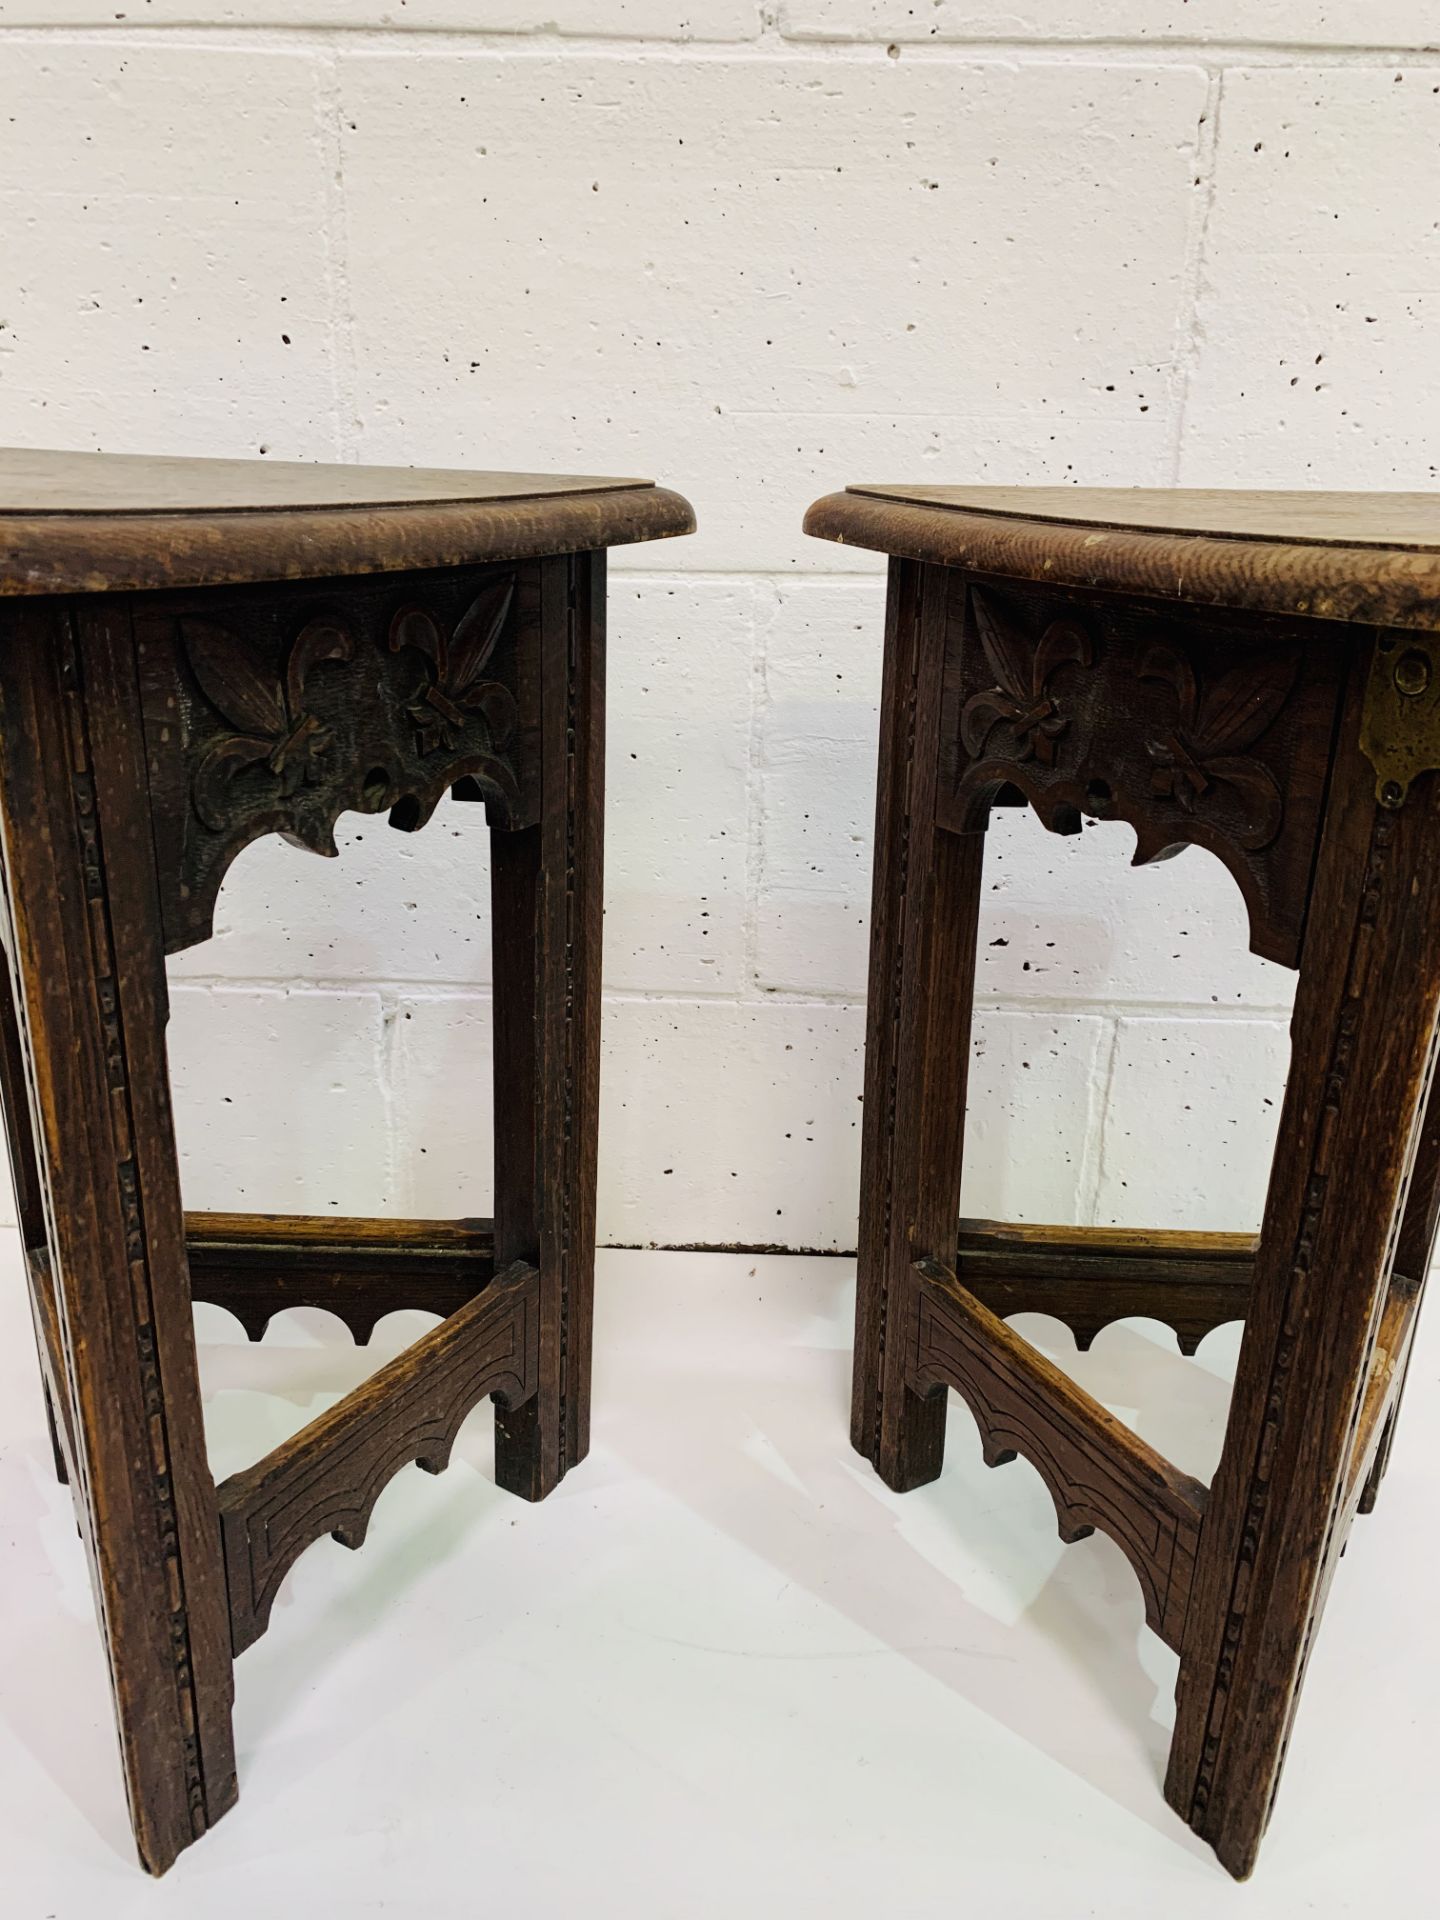 Pair of oak Arts and Crafts triangular stools with lifting lids, carved with fleurs-de-lys. - Image 3 of 4